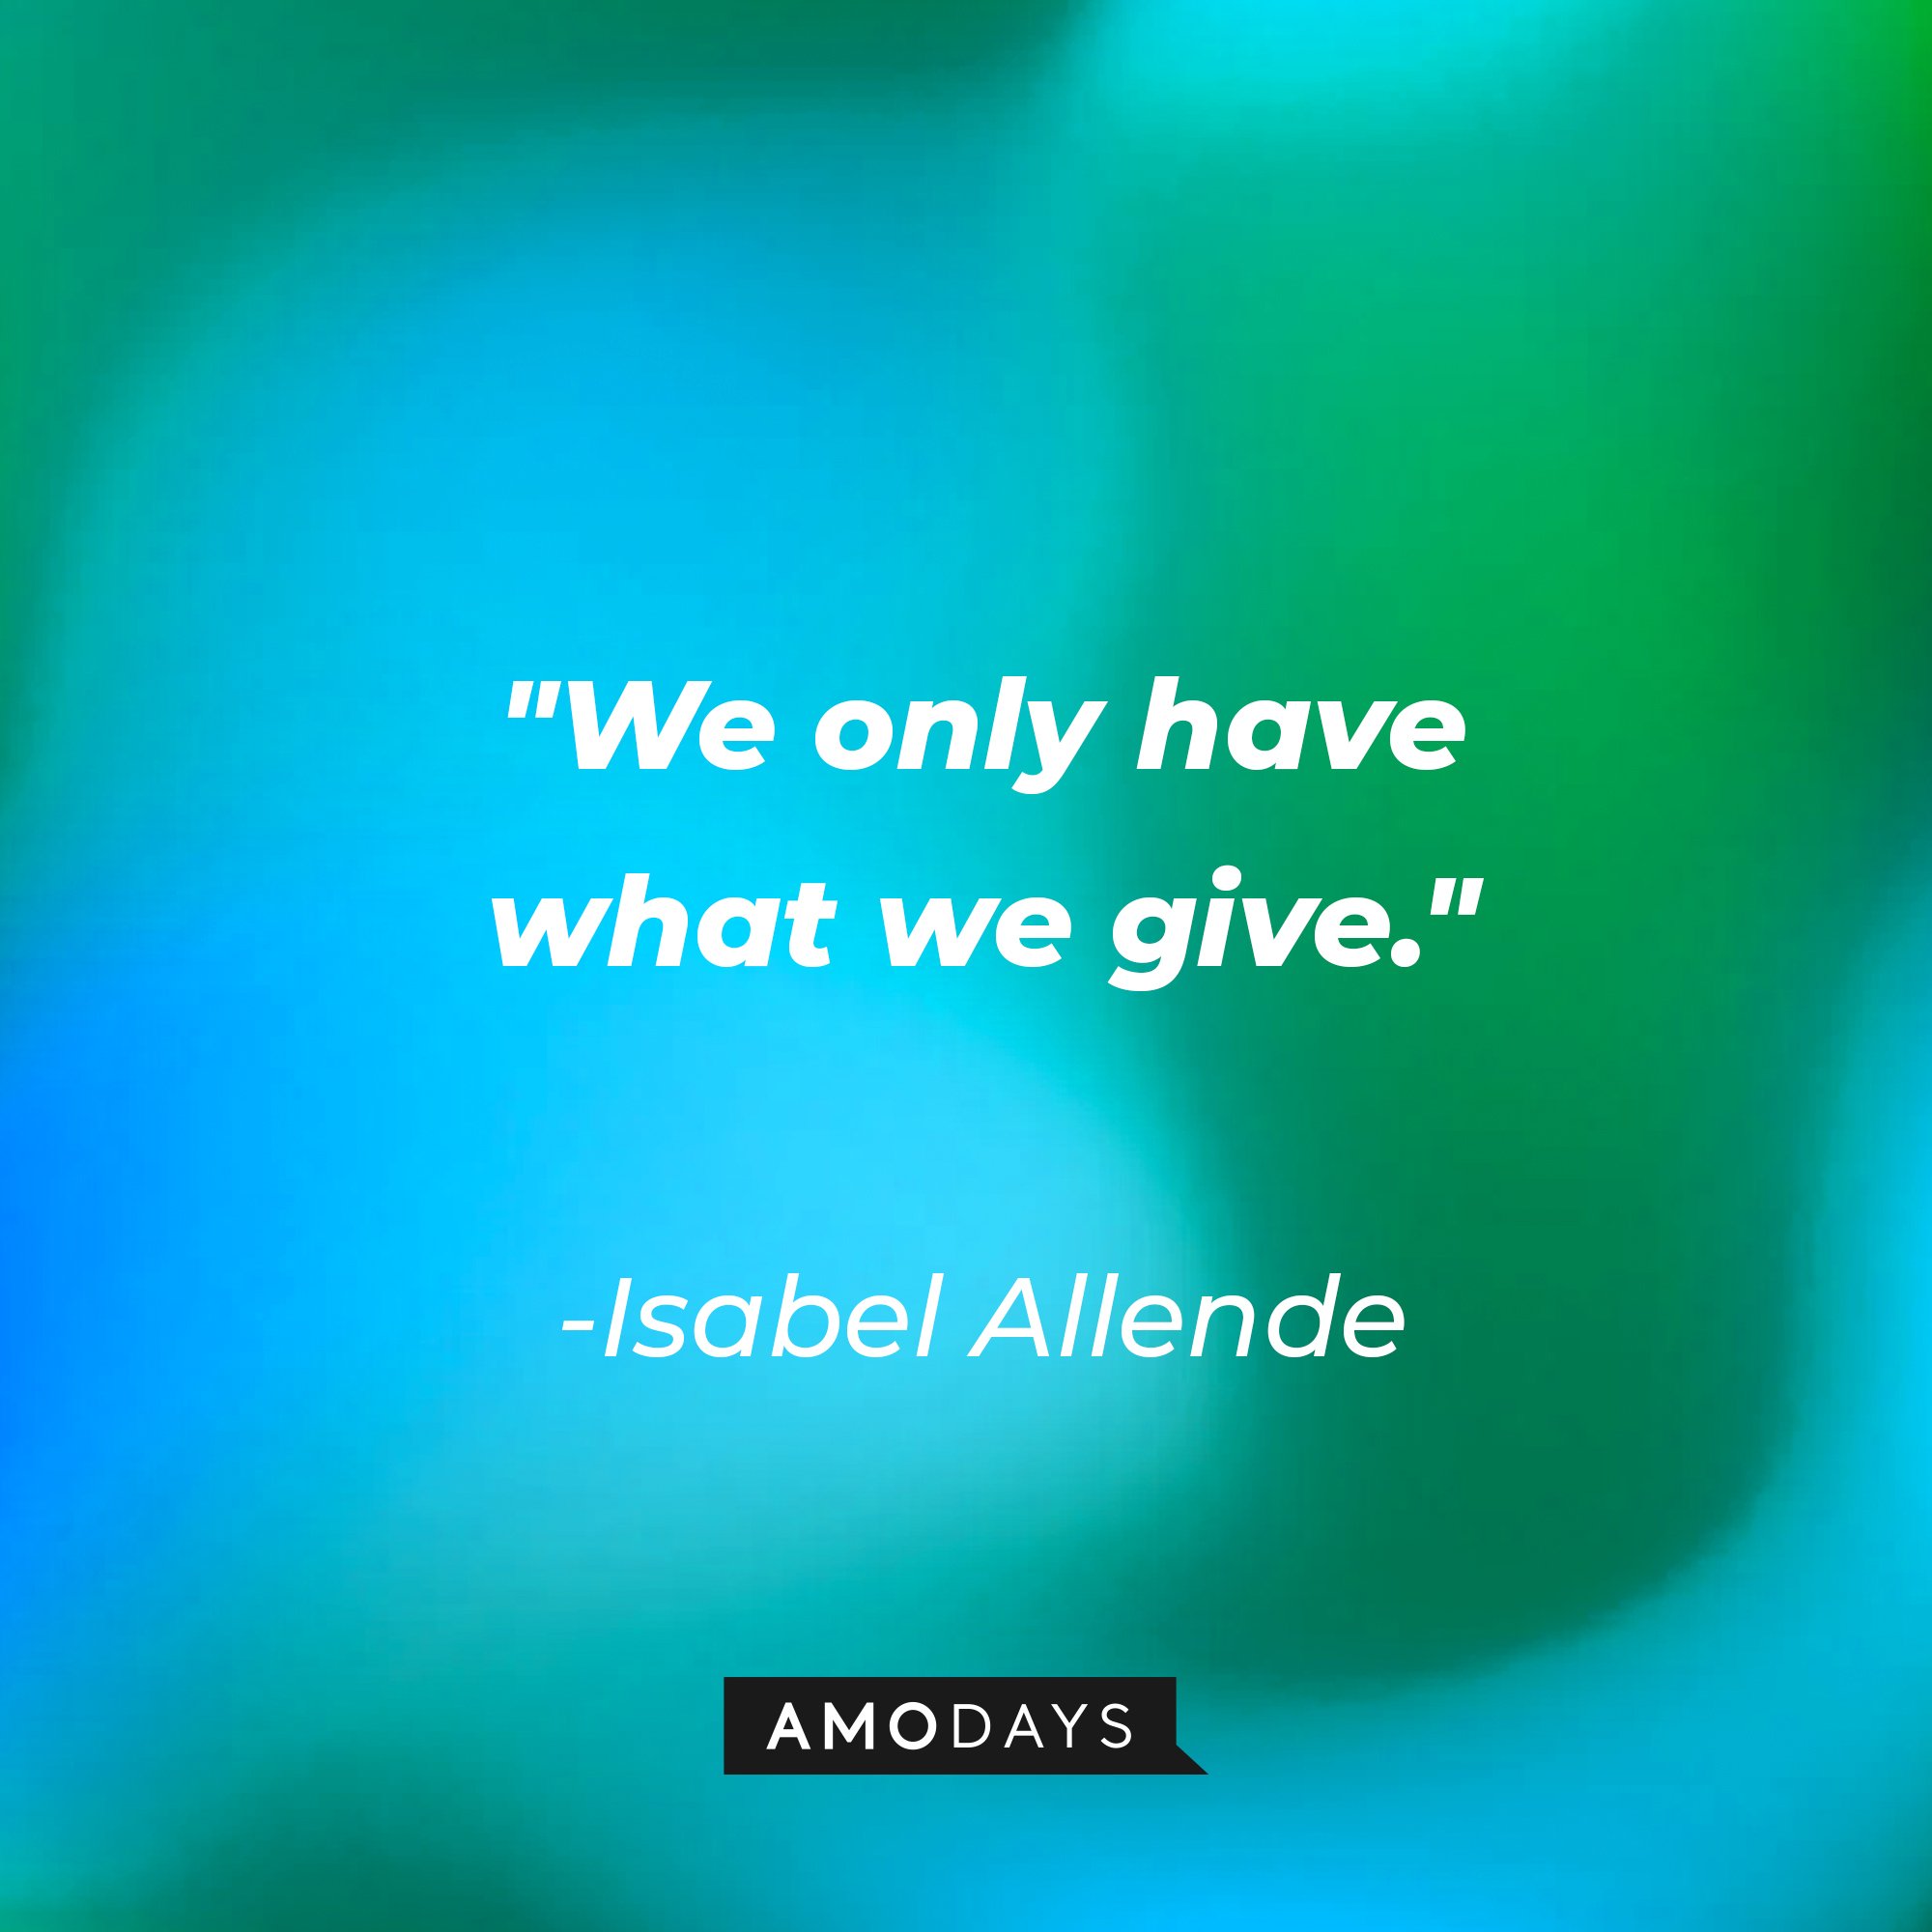 Isabel Allende's quote: "We only have what we give." | Image: AmoDays